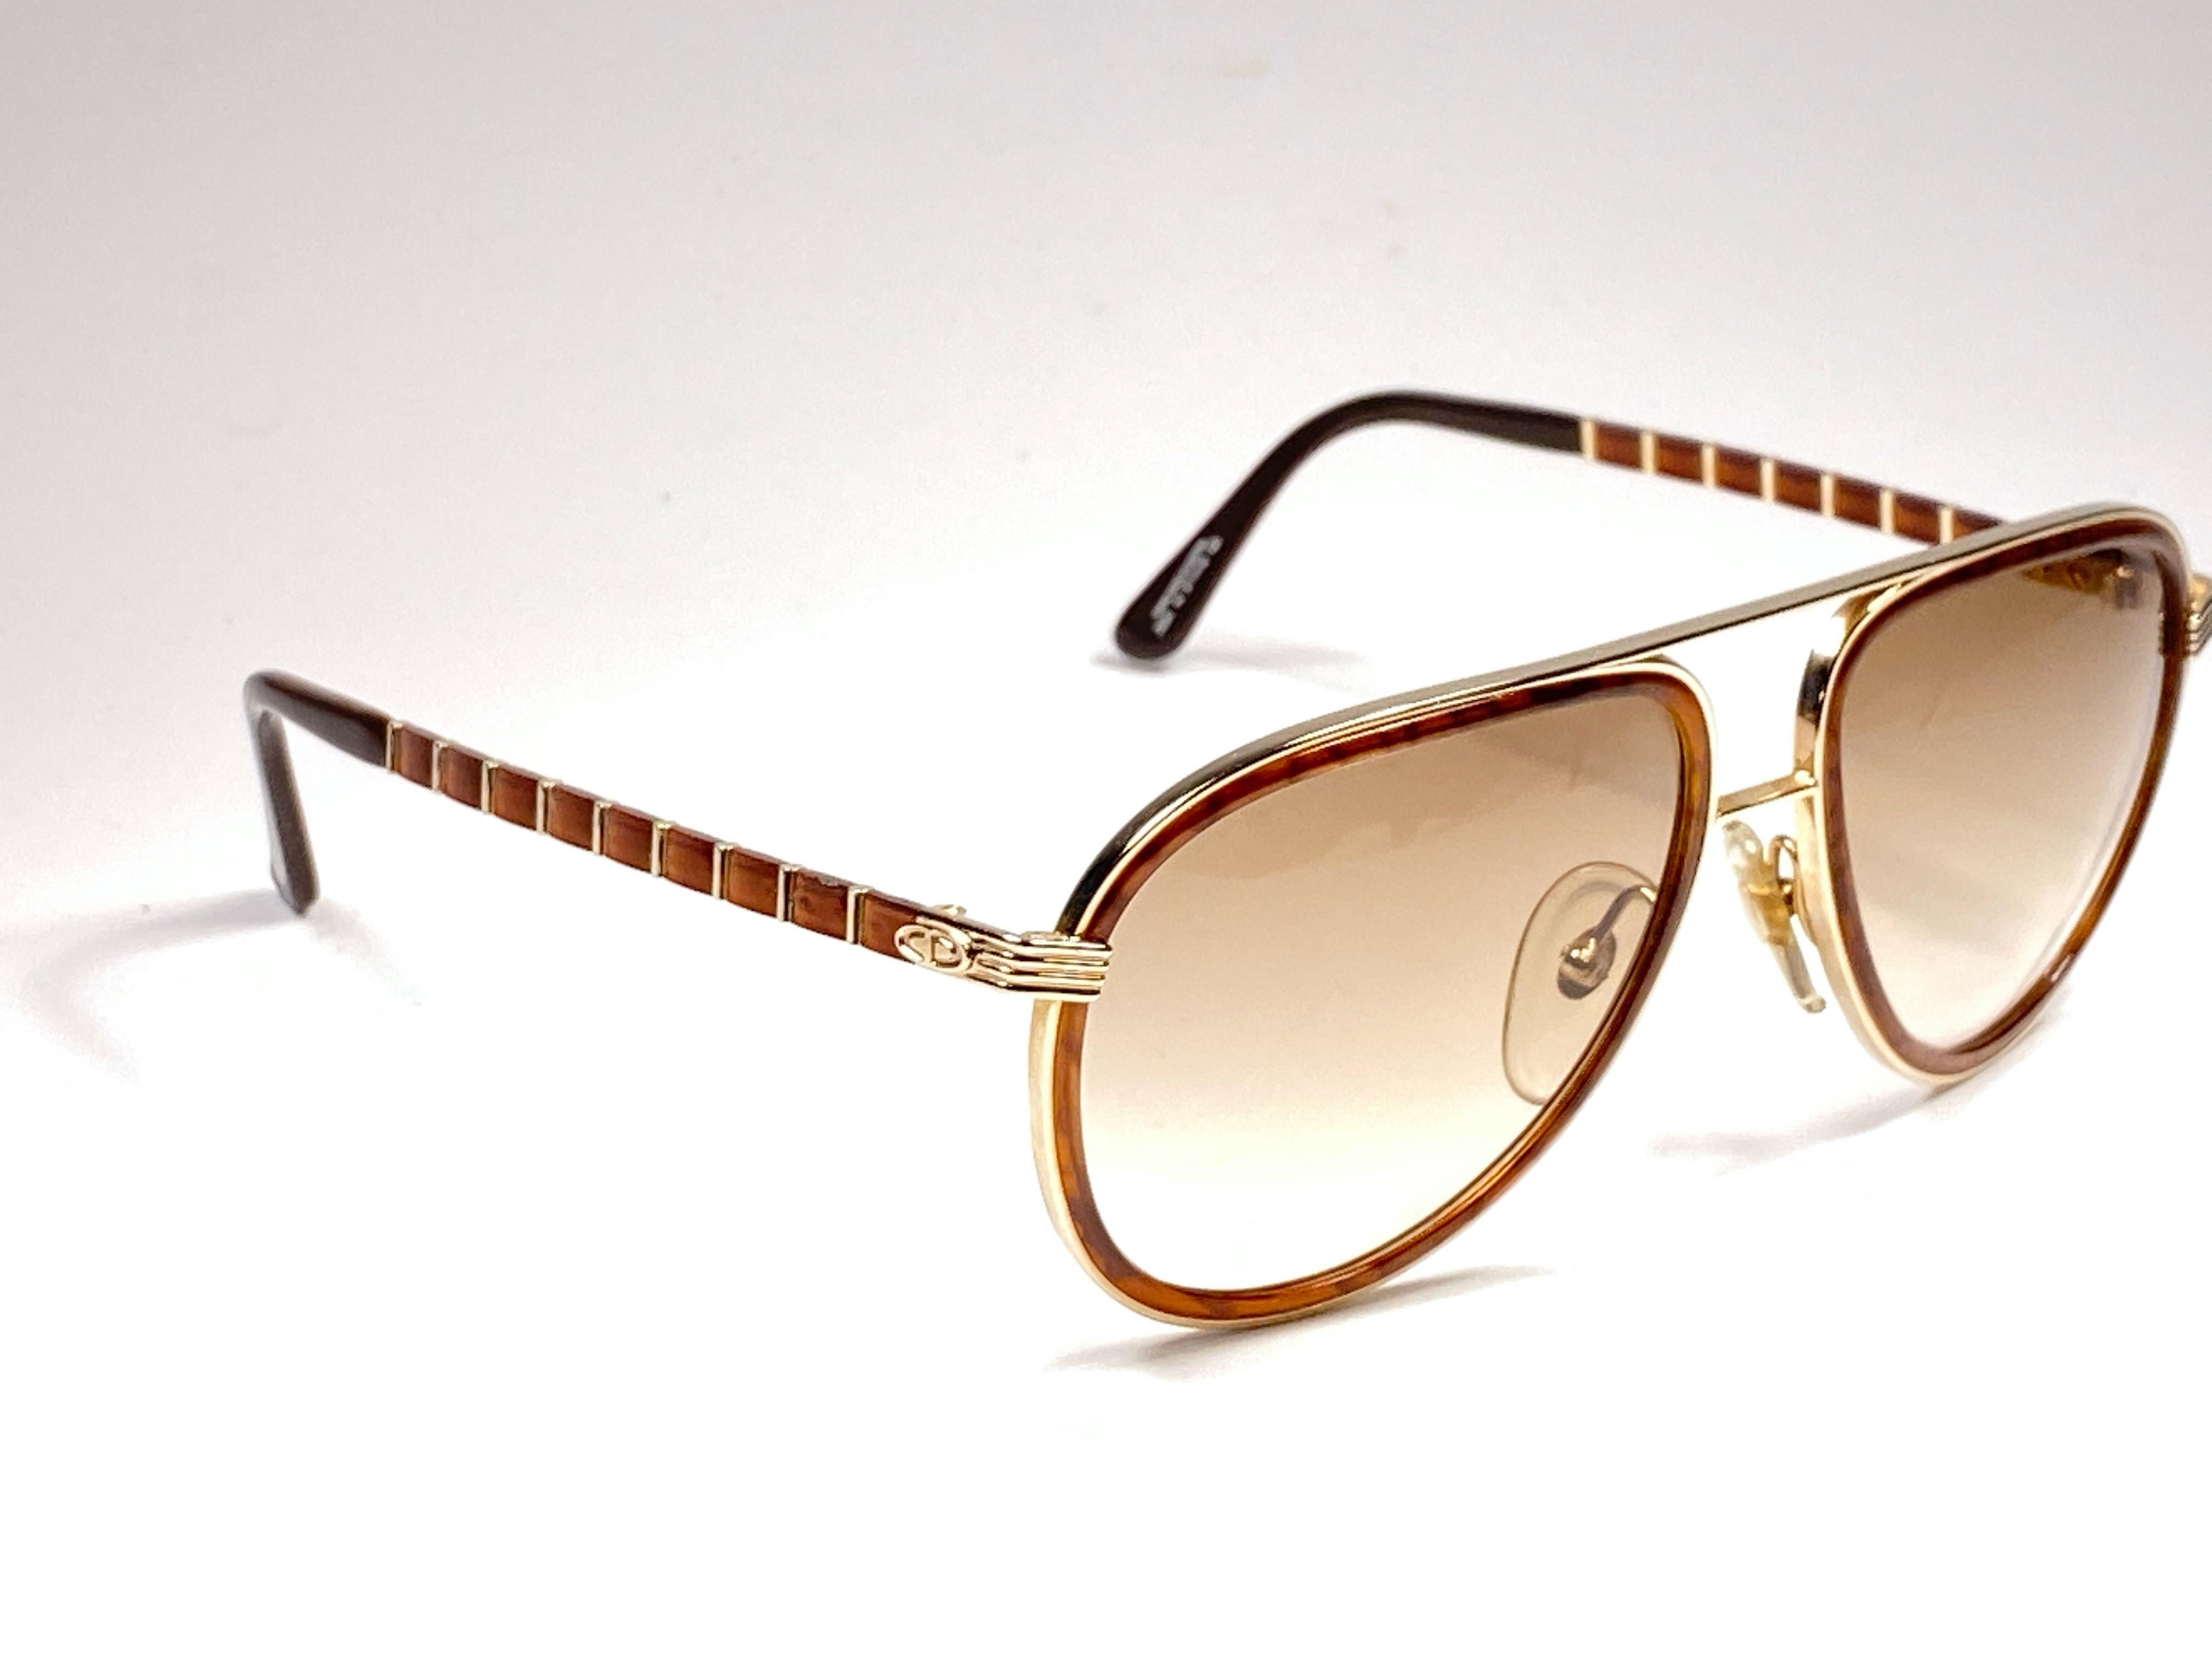 New vintage Christian Dior Monsieur sunglasses. .

Spotless brown gradient lenses.
New, never worn or displayed this item may show light sign of wear due to storage.

Made in Austria

MEASUREMENTS :

FRONT : 14 CMS

LENS HEIGHT : 5 CMS 

LENS WIDTH